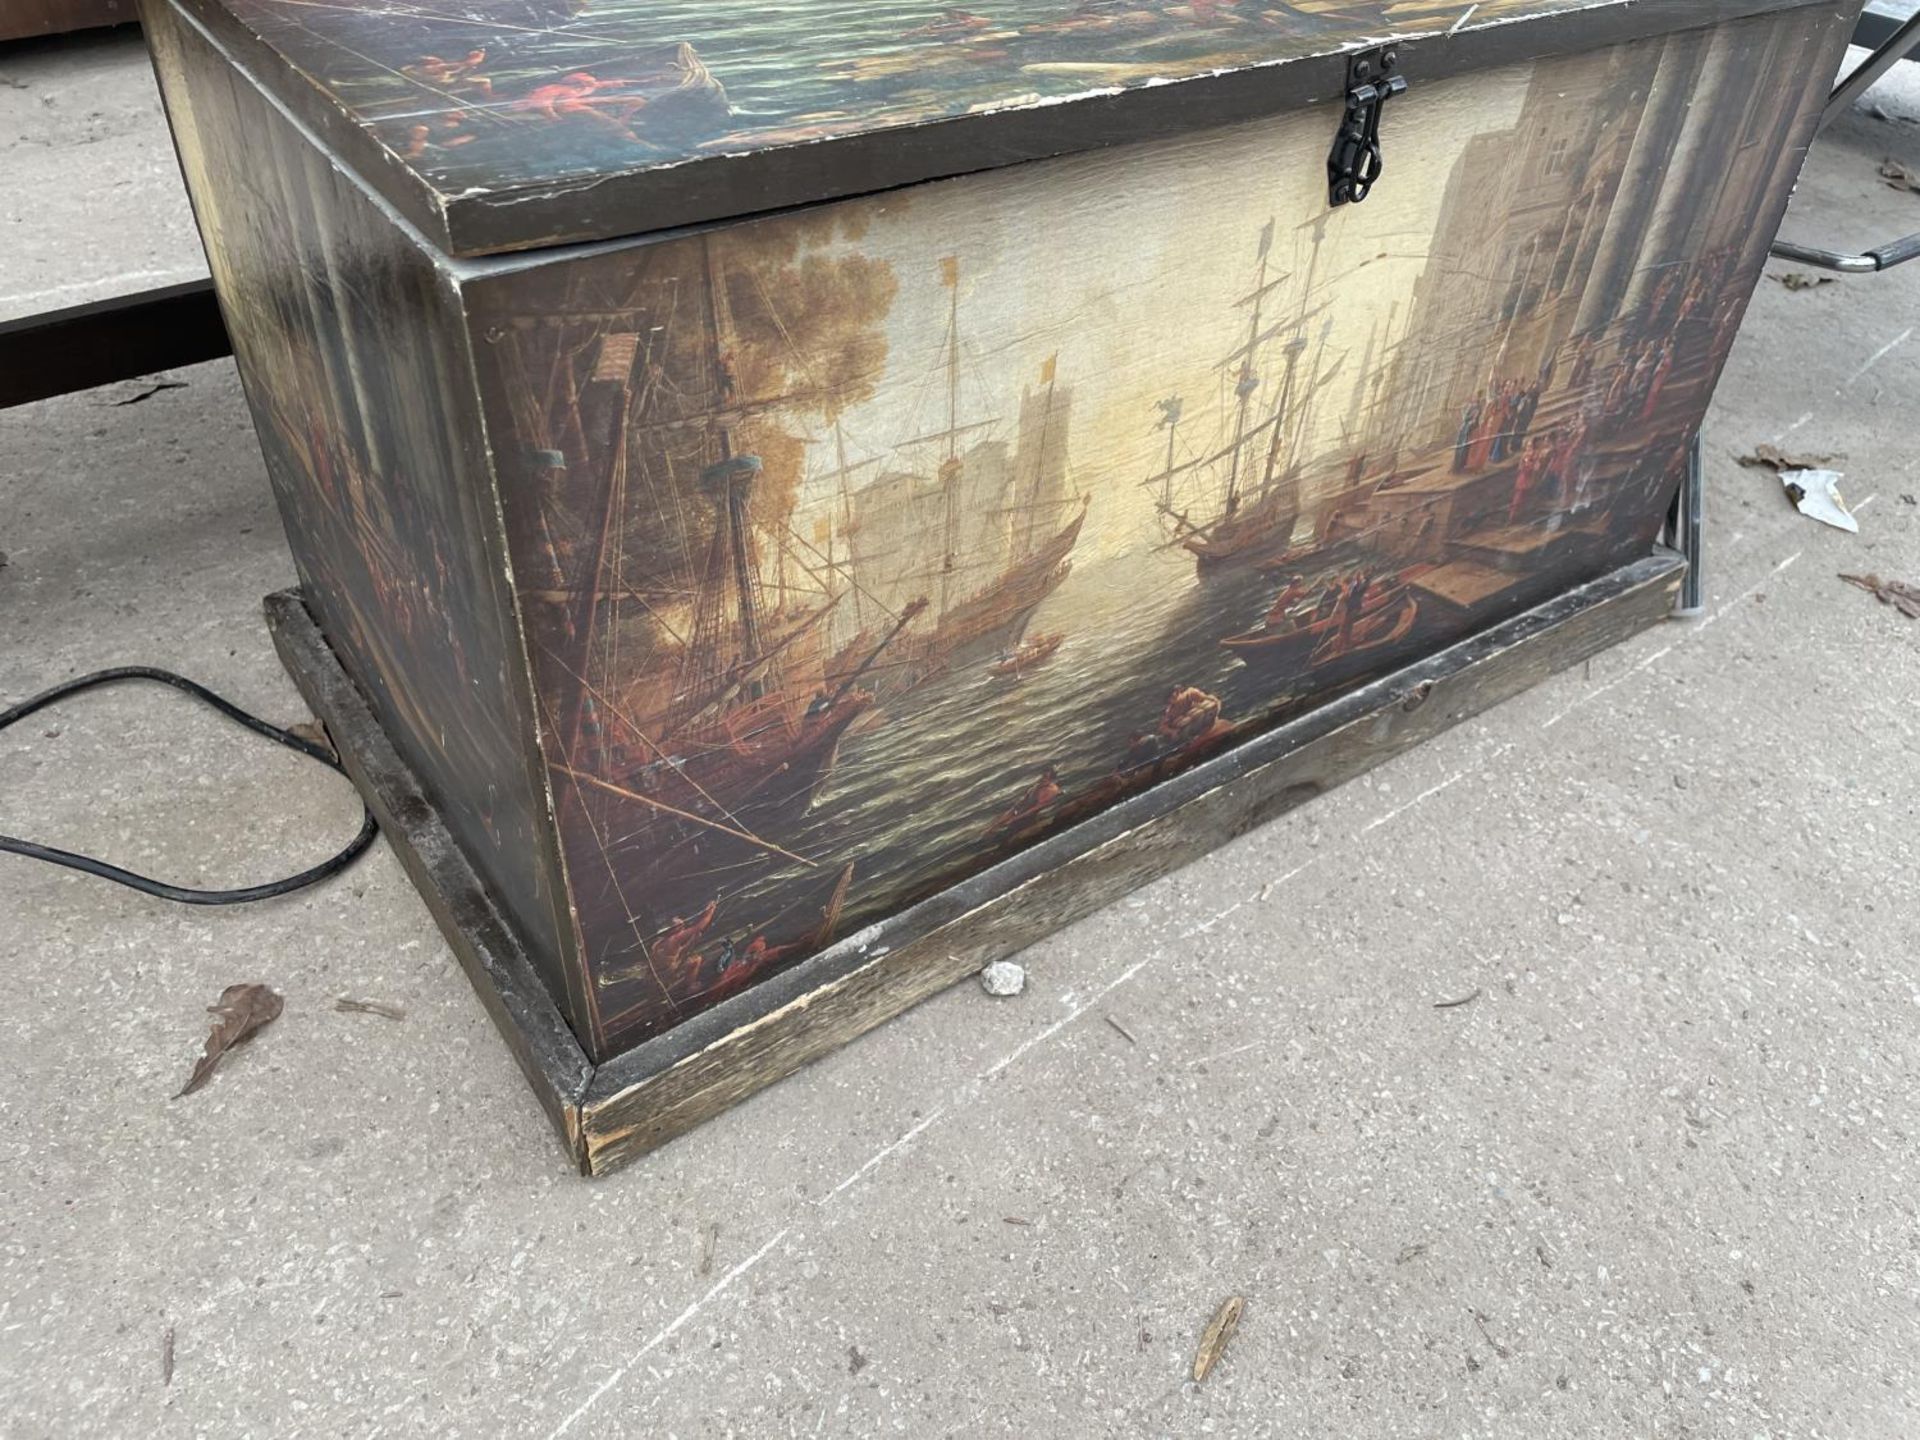 A MODERN TRUNK DEPICTING MASTED SHIPS - Image 3 of 3